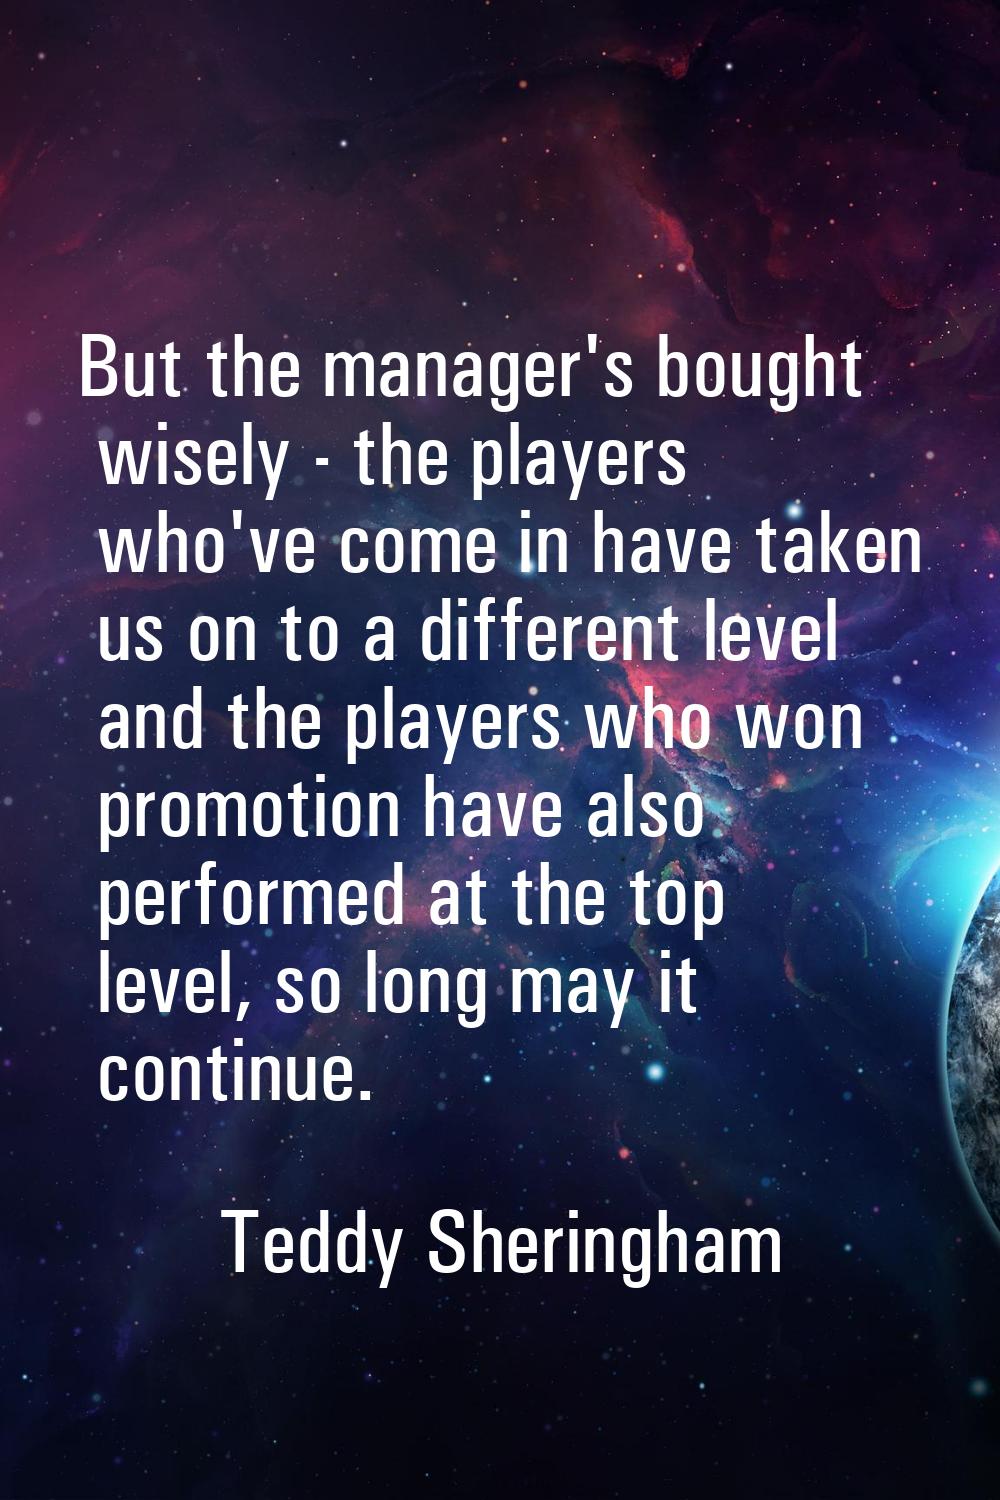 But the manager's bought wisely - the players who've come in have taken us on to a different level 